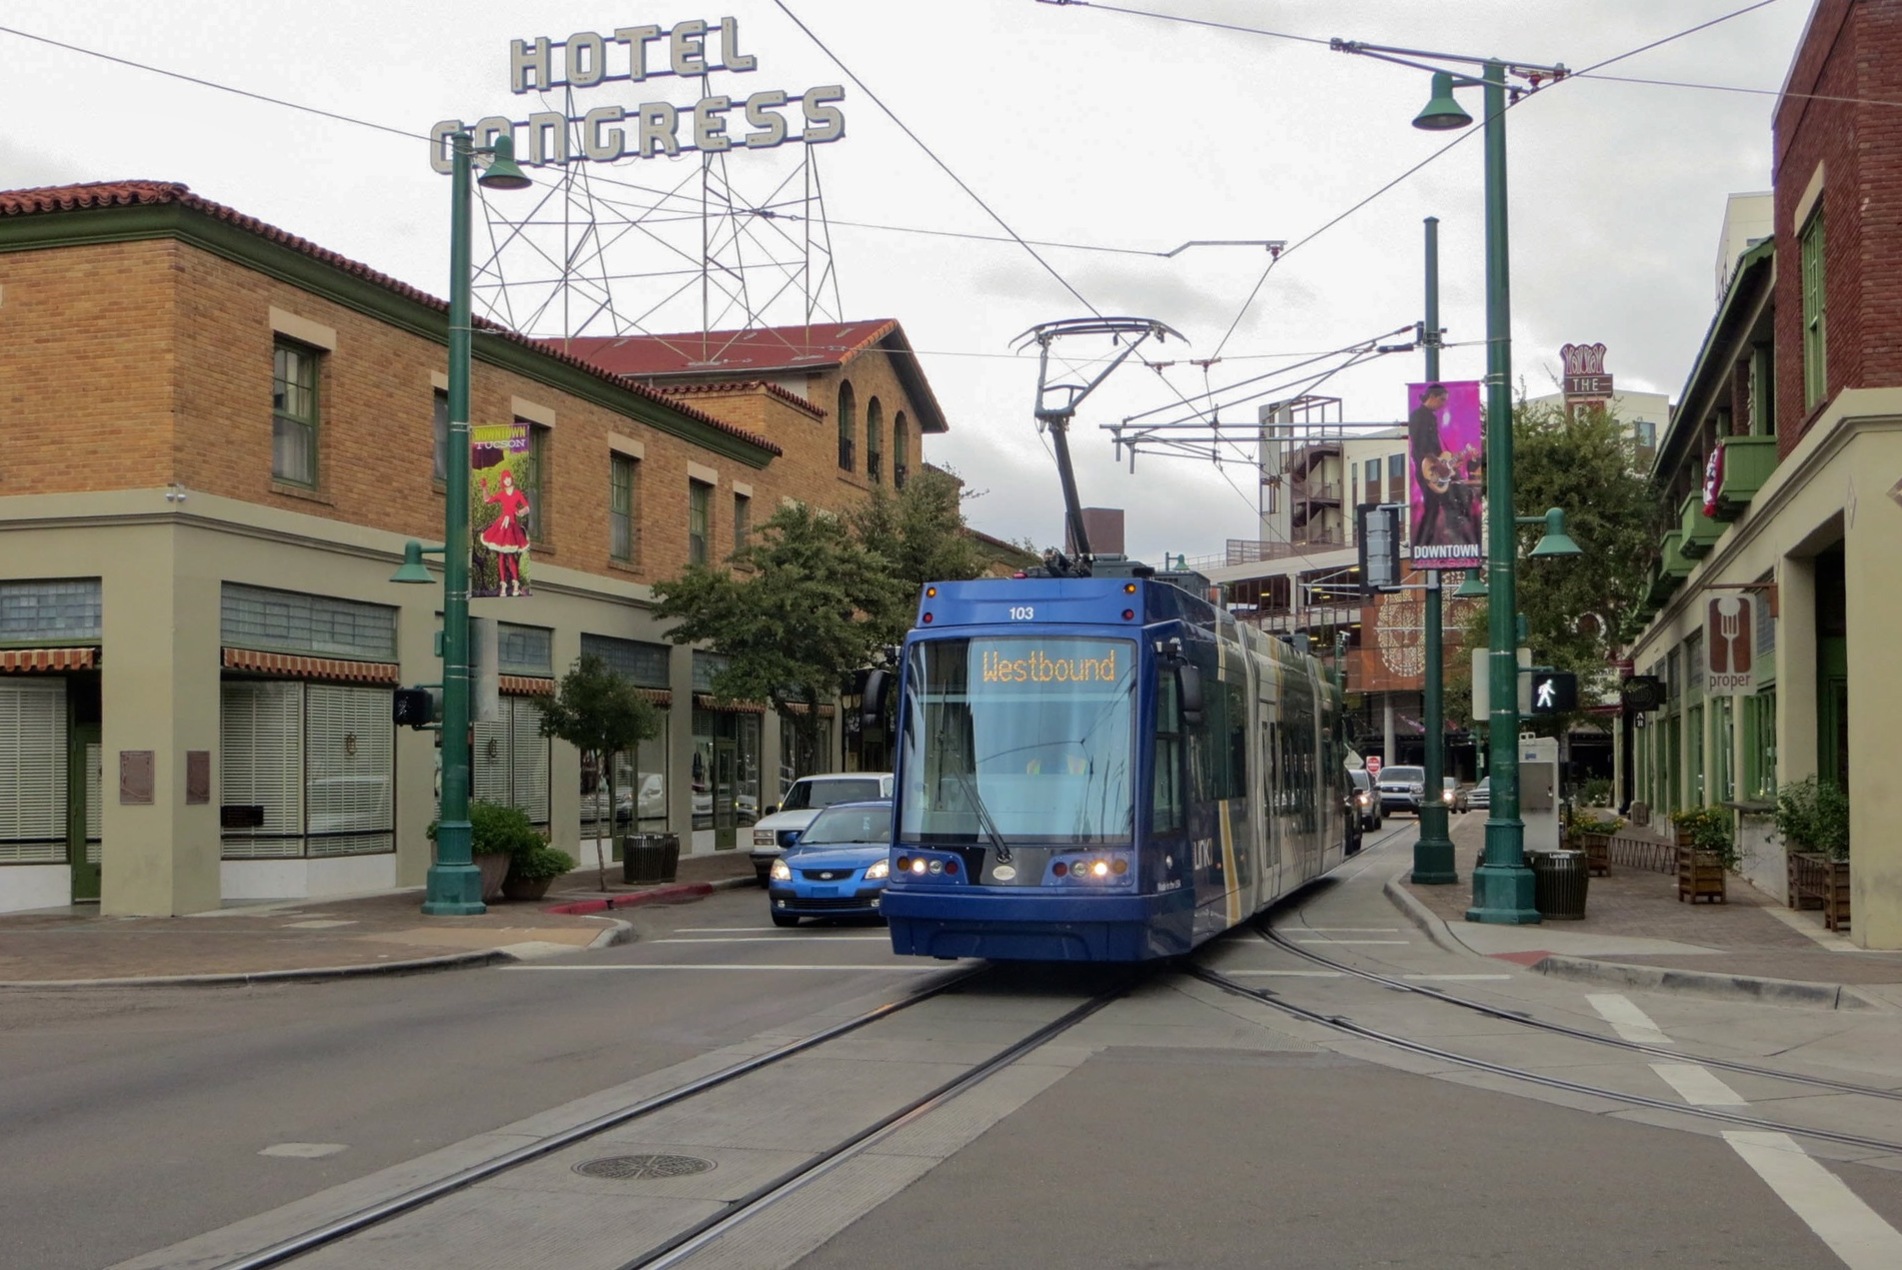 Tucson Sun link streetcar in action - Wikipedia